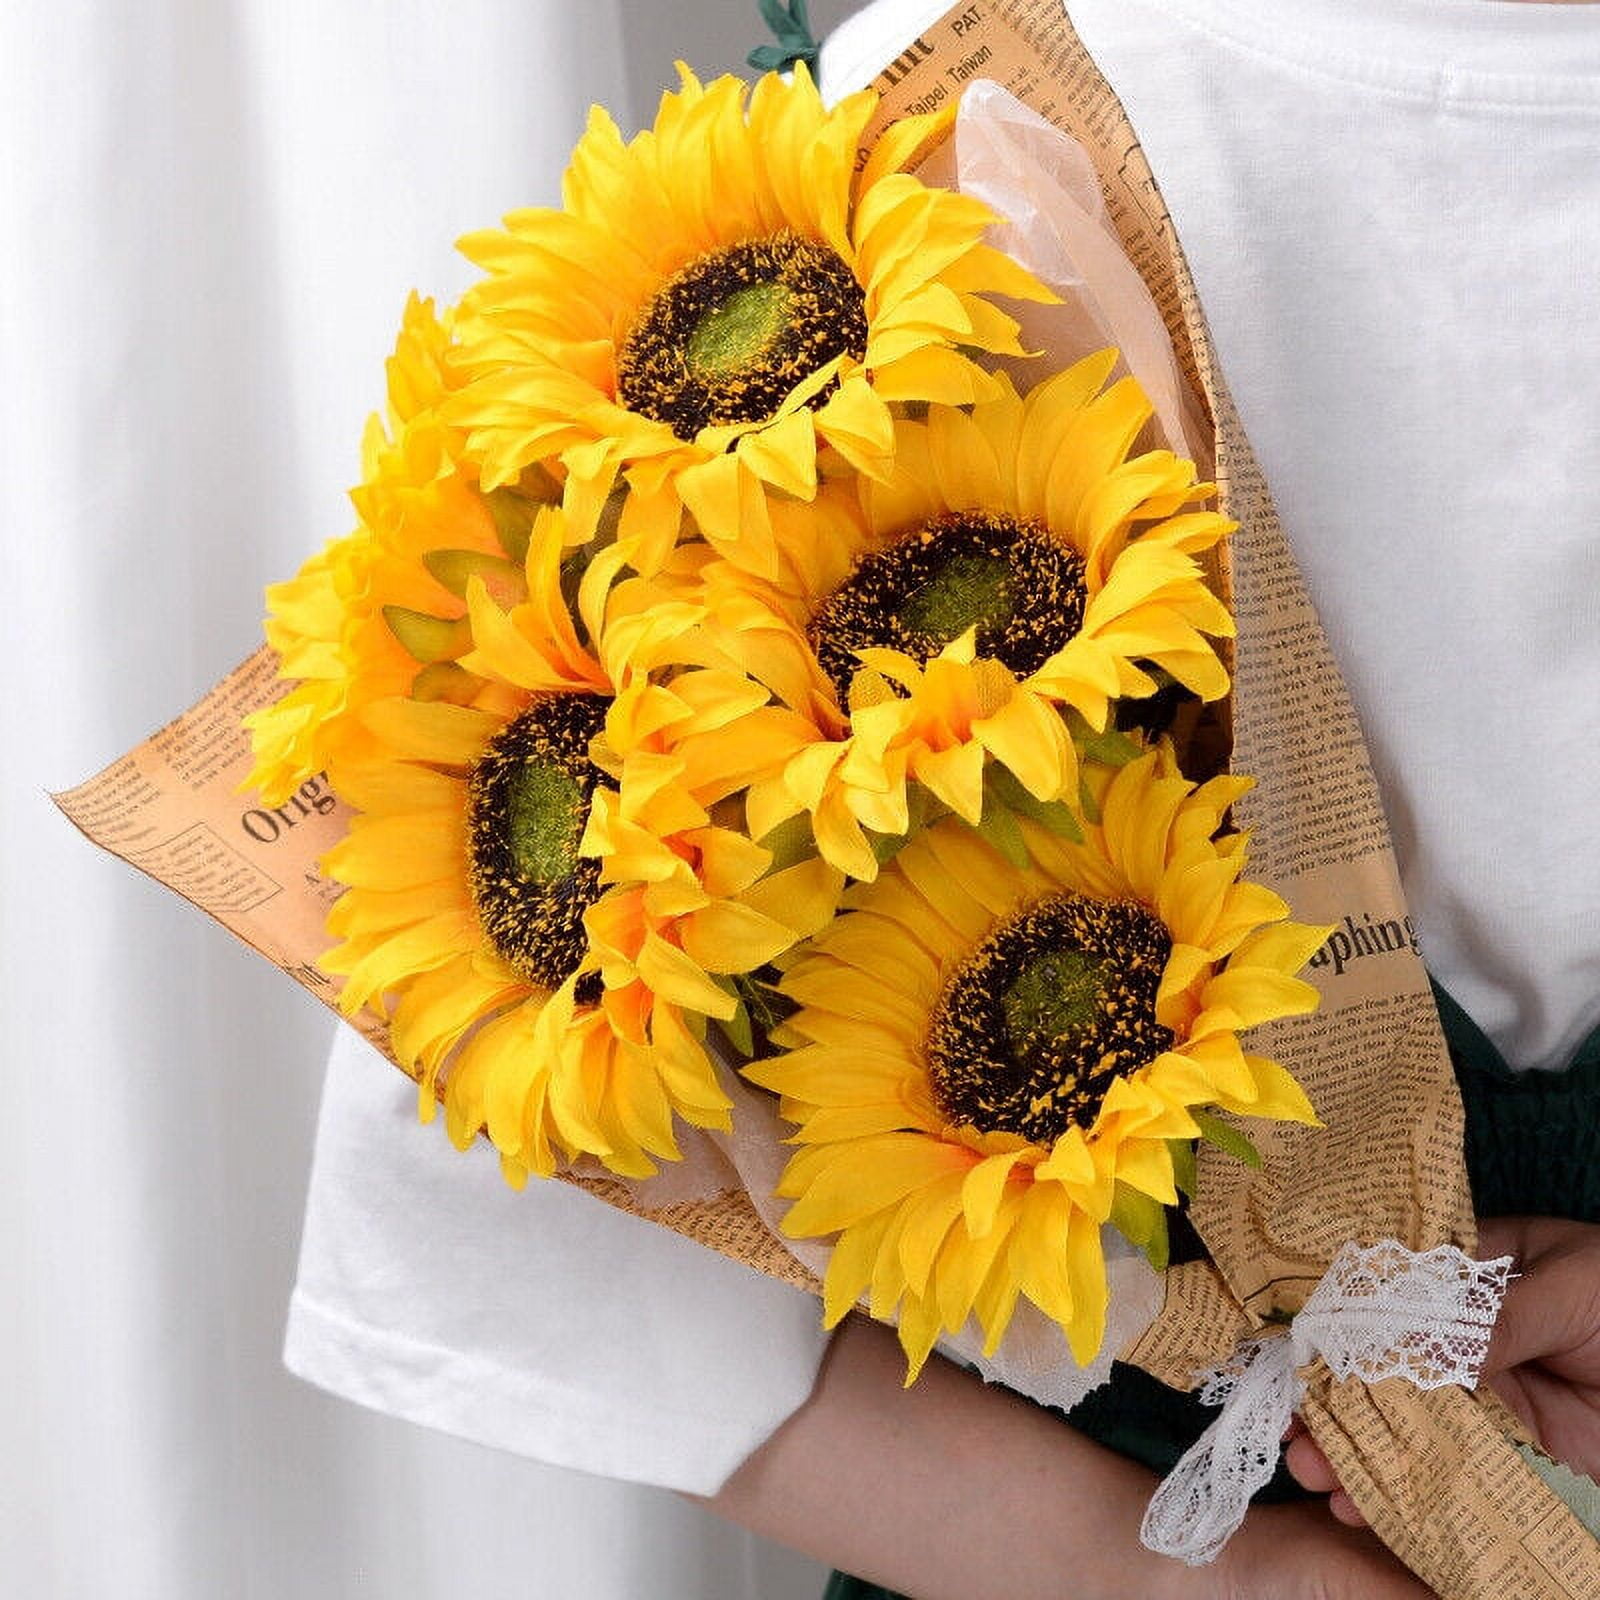 CEWOR 10pcs Sunflowers Artificial Flowers with Long Stem Fake Sunflowers  Bulk Fall Decoration for Wedding Home Birthday Party Outdoor Indoor Decor